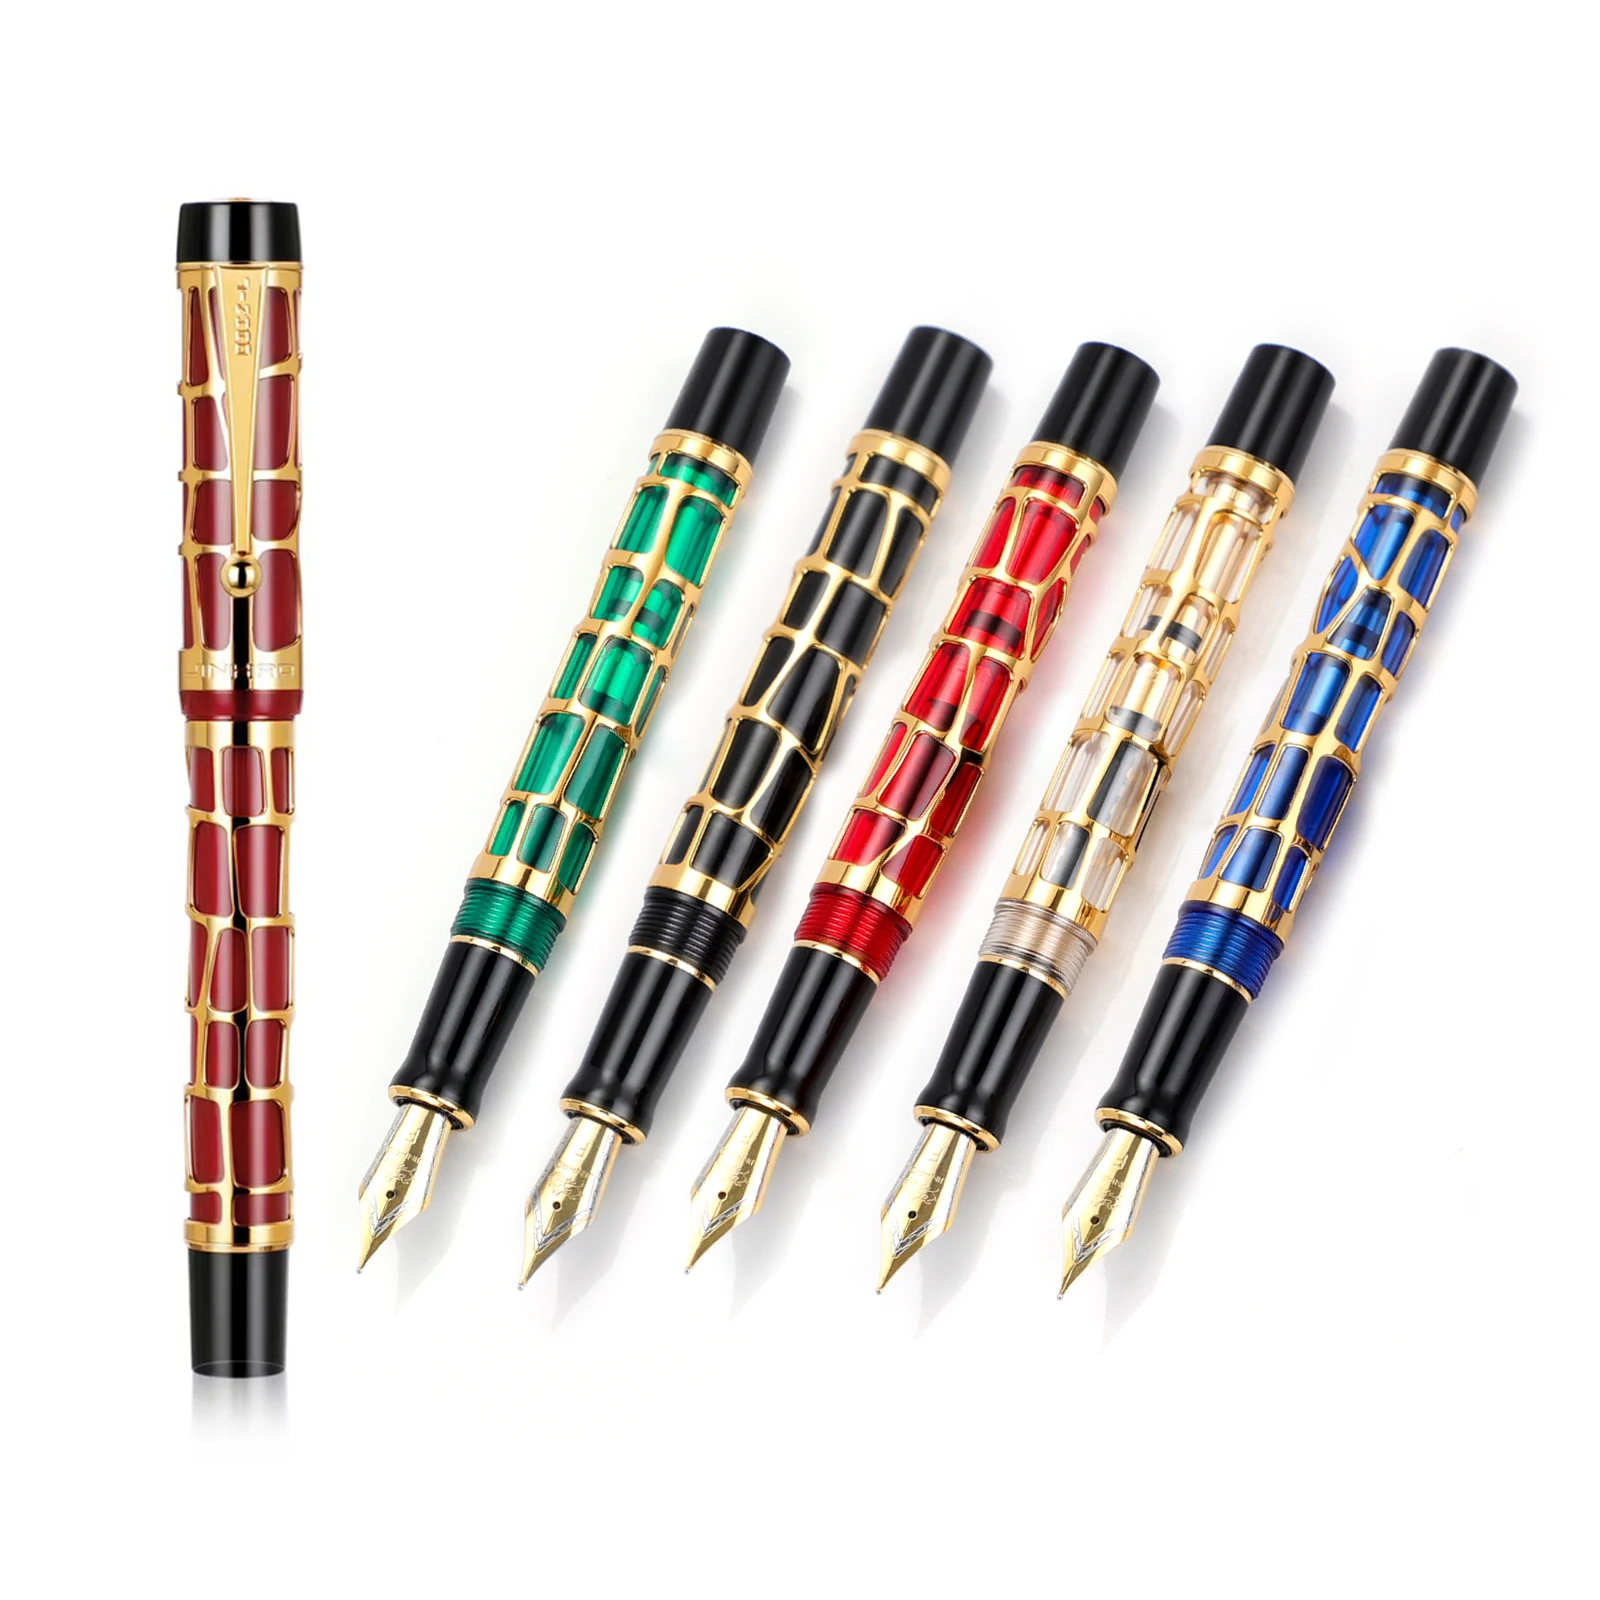 Jinhao Century 100 Fountain Pen Electroplating Gold Hollow Writing Ink Pens EF 0.4mm Nib for Business Office supplies gift pens jinhao century 100 new fountain pen real gold electroplating hollow out ink pens smoothly writing f nib for writing gift pen